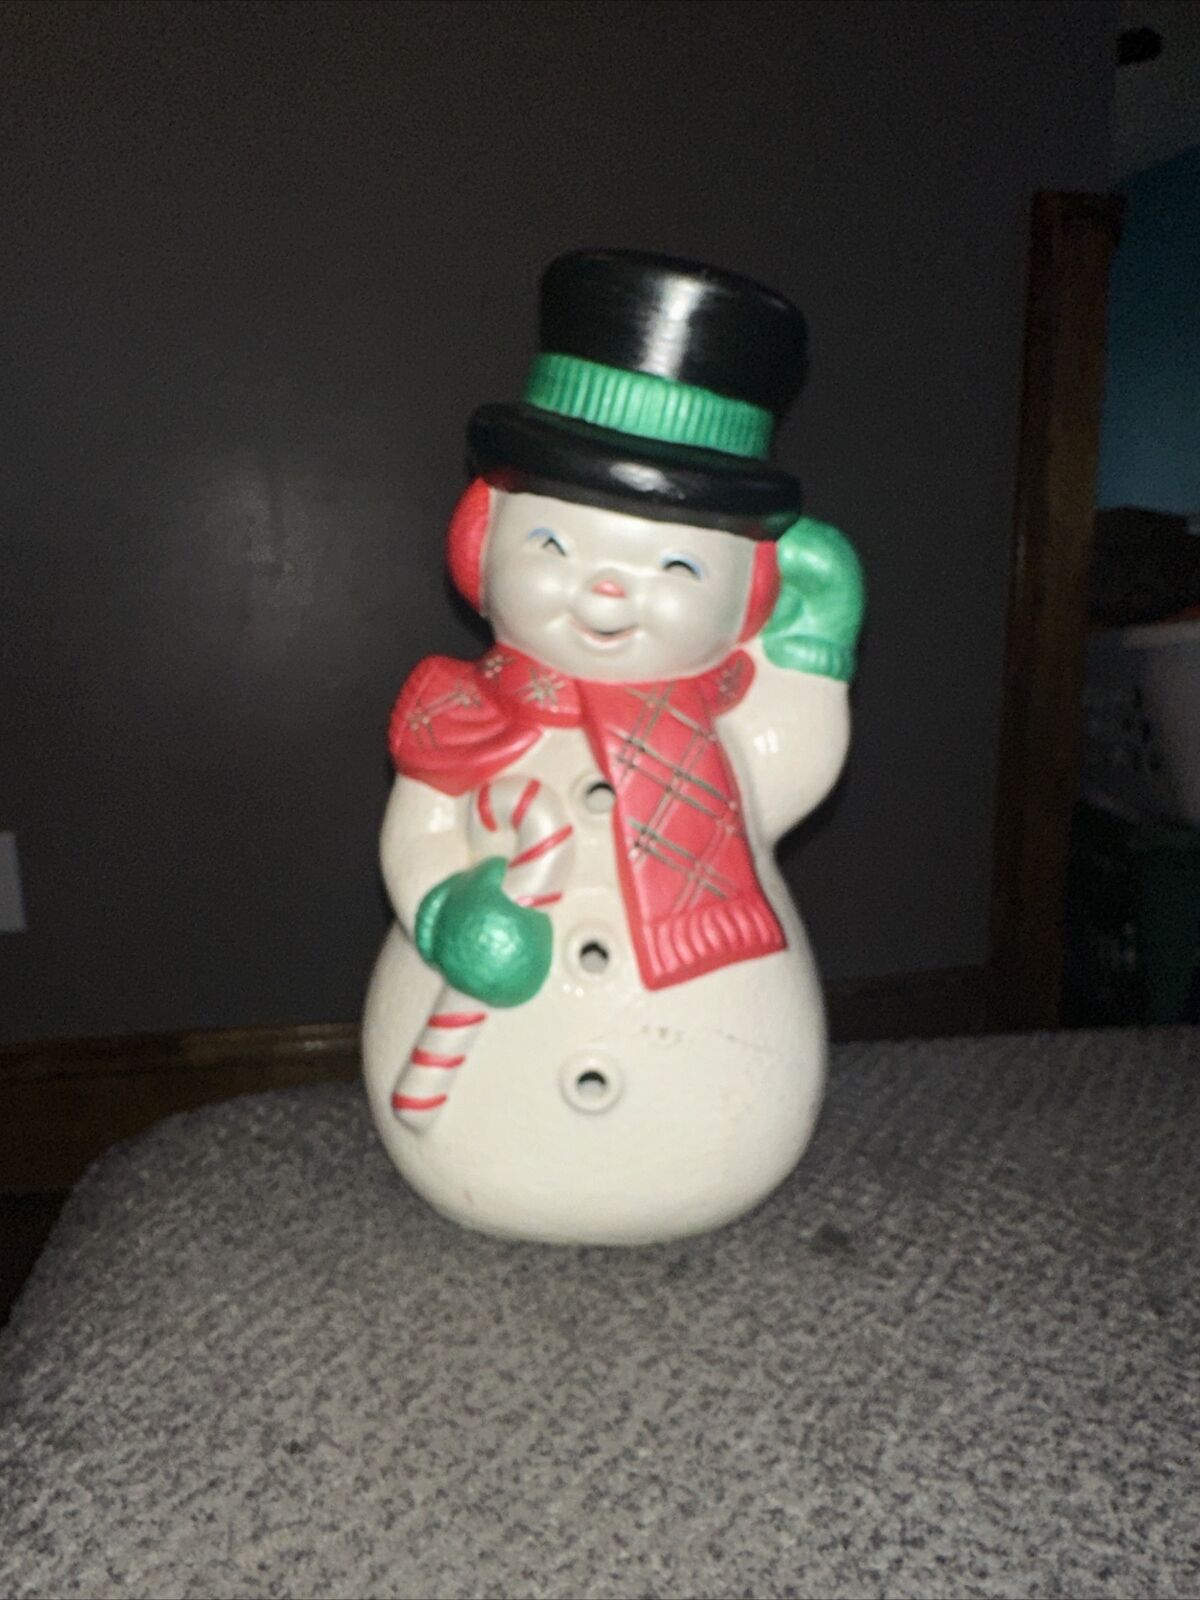 Vintage Ceramic Snowman Frosty Mold 13” Top Hat Candy Cane Scarf Hand Painted